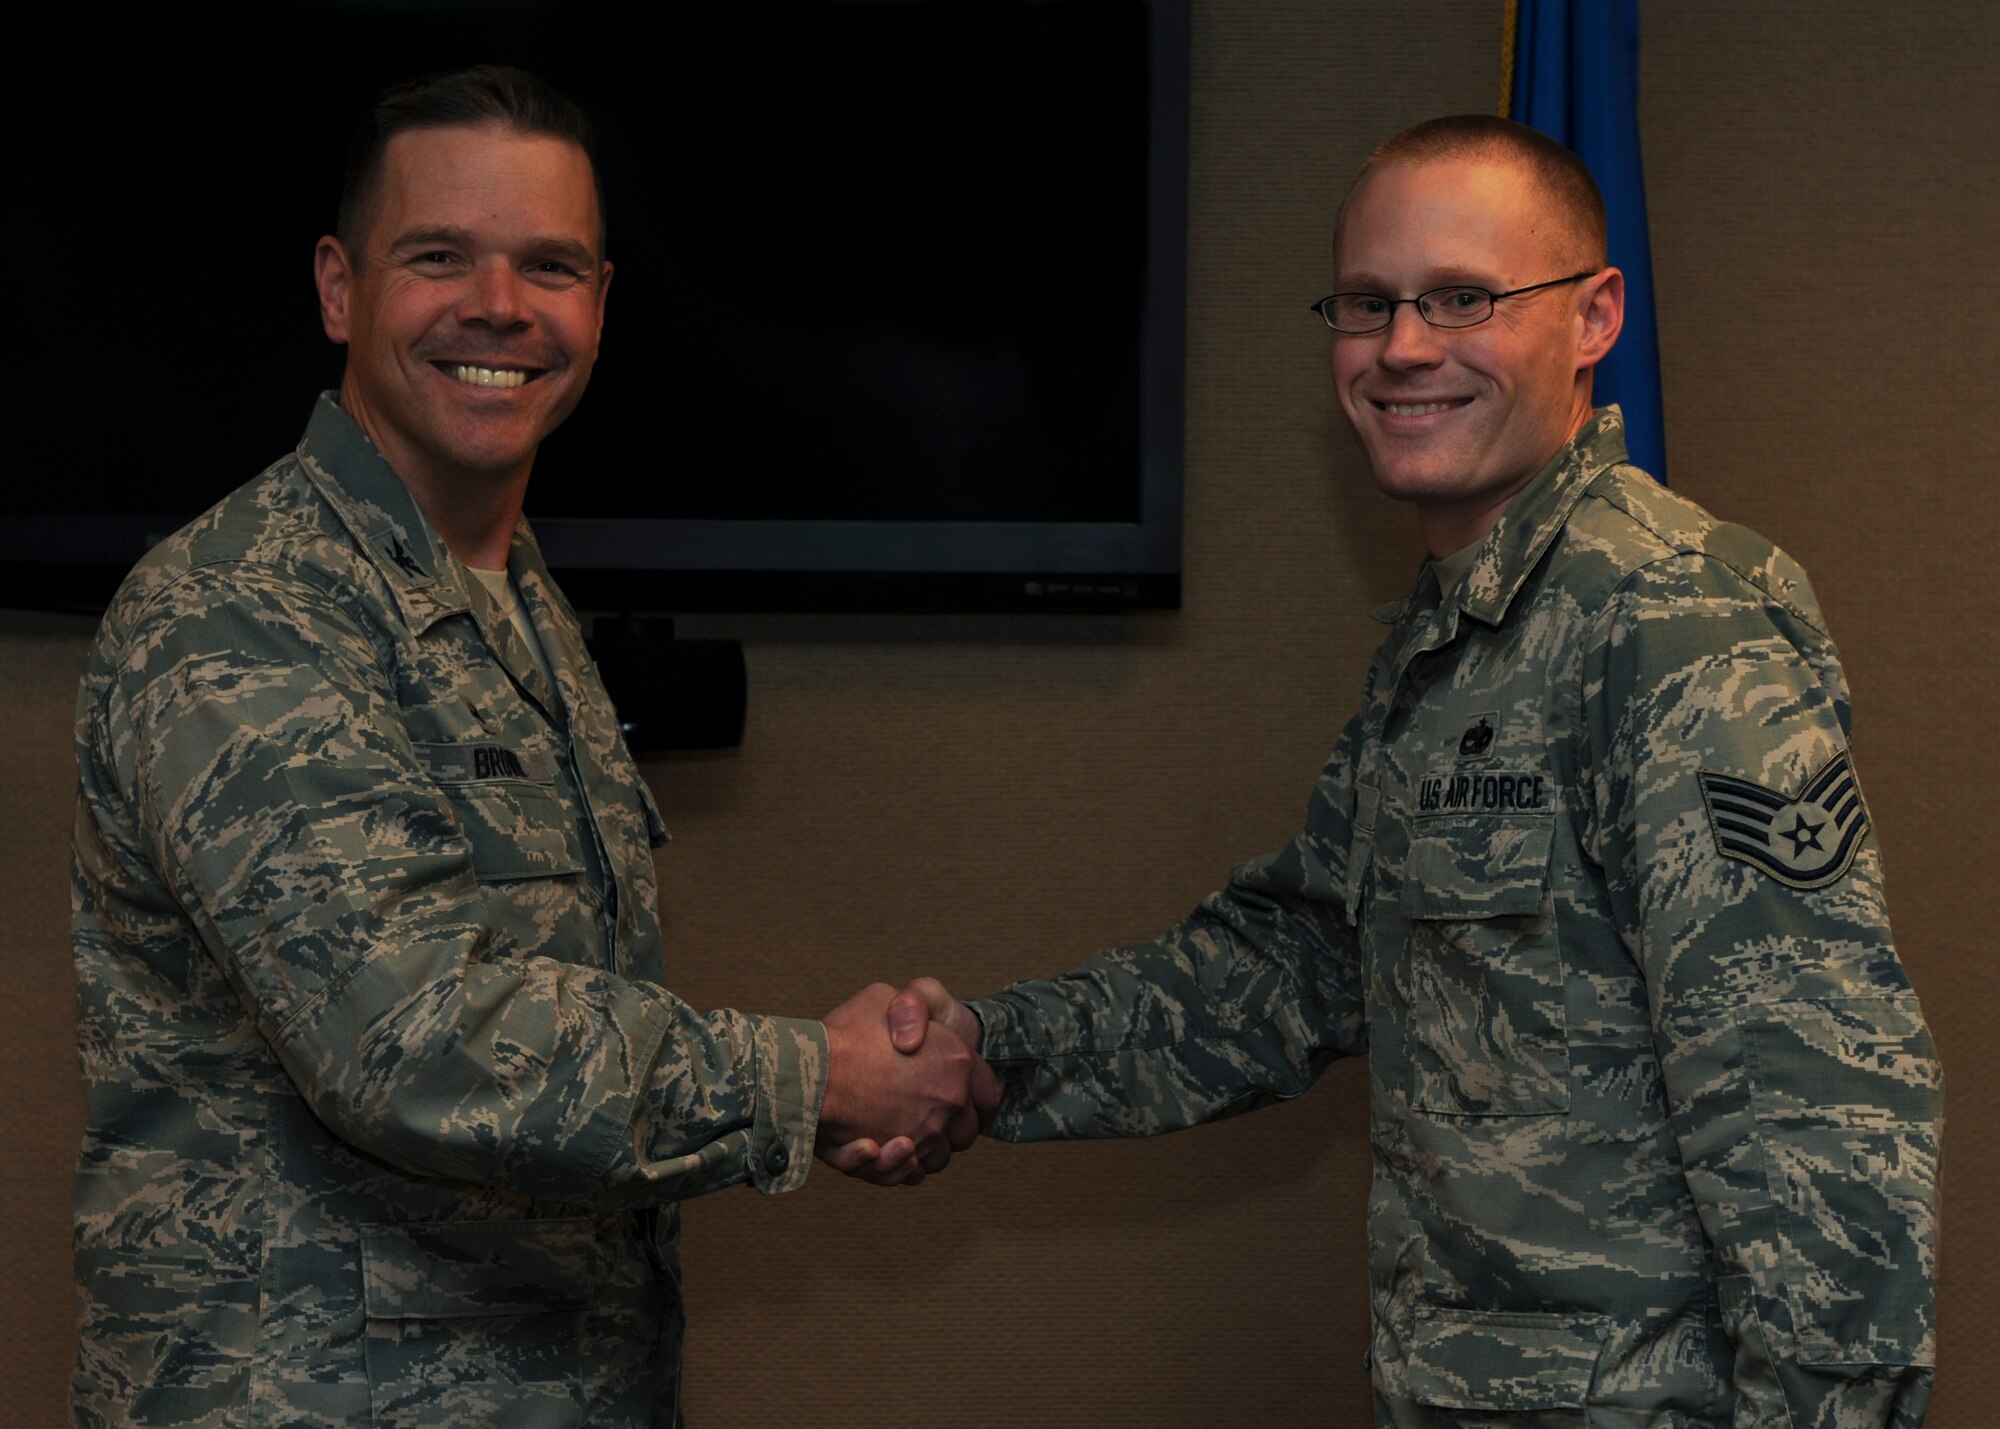 (From right) U.S. Air Force Staff Sgt. Roland Ryan, a 373rd Training Squadron aerospace propulsion technical training instructor, is congratulated by U.S. Air Force Col. Charles Brown Jr., 19th Airlift Wing commander, as Combat Airlifter of the Week Dec. 14, 2015, at Little Rock Air Force Base, Ark. Ryan has played an integral role as the lead management internal control toolset inspector for numerous in-house inspections. (U.S. Air Force photo by Airman 1st Class Mercedes Muro) 

